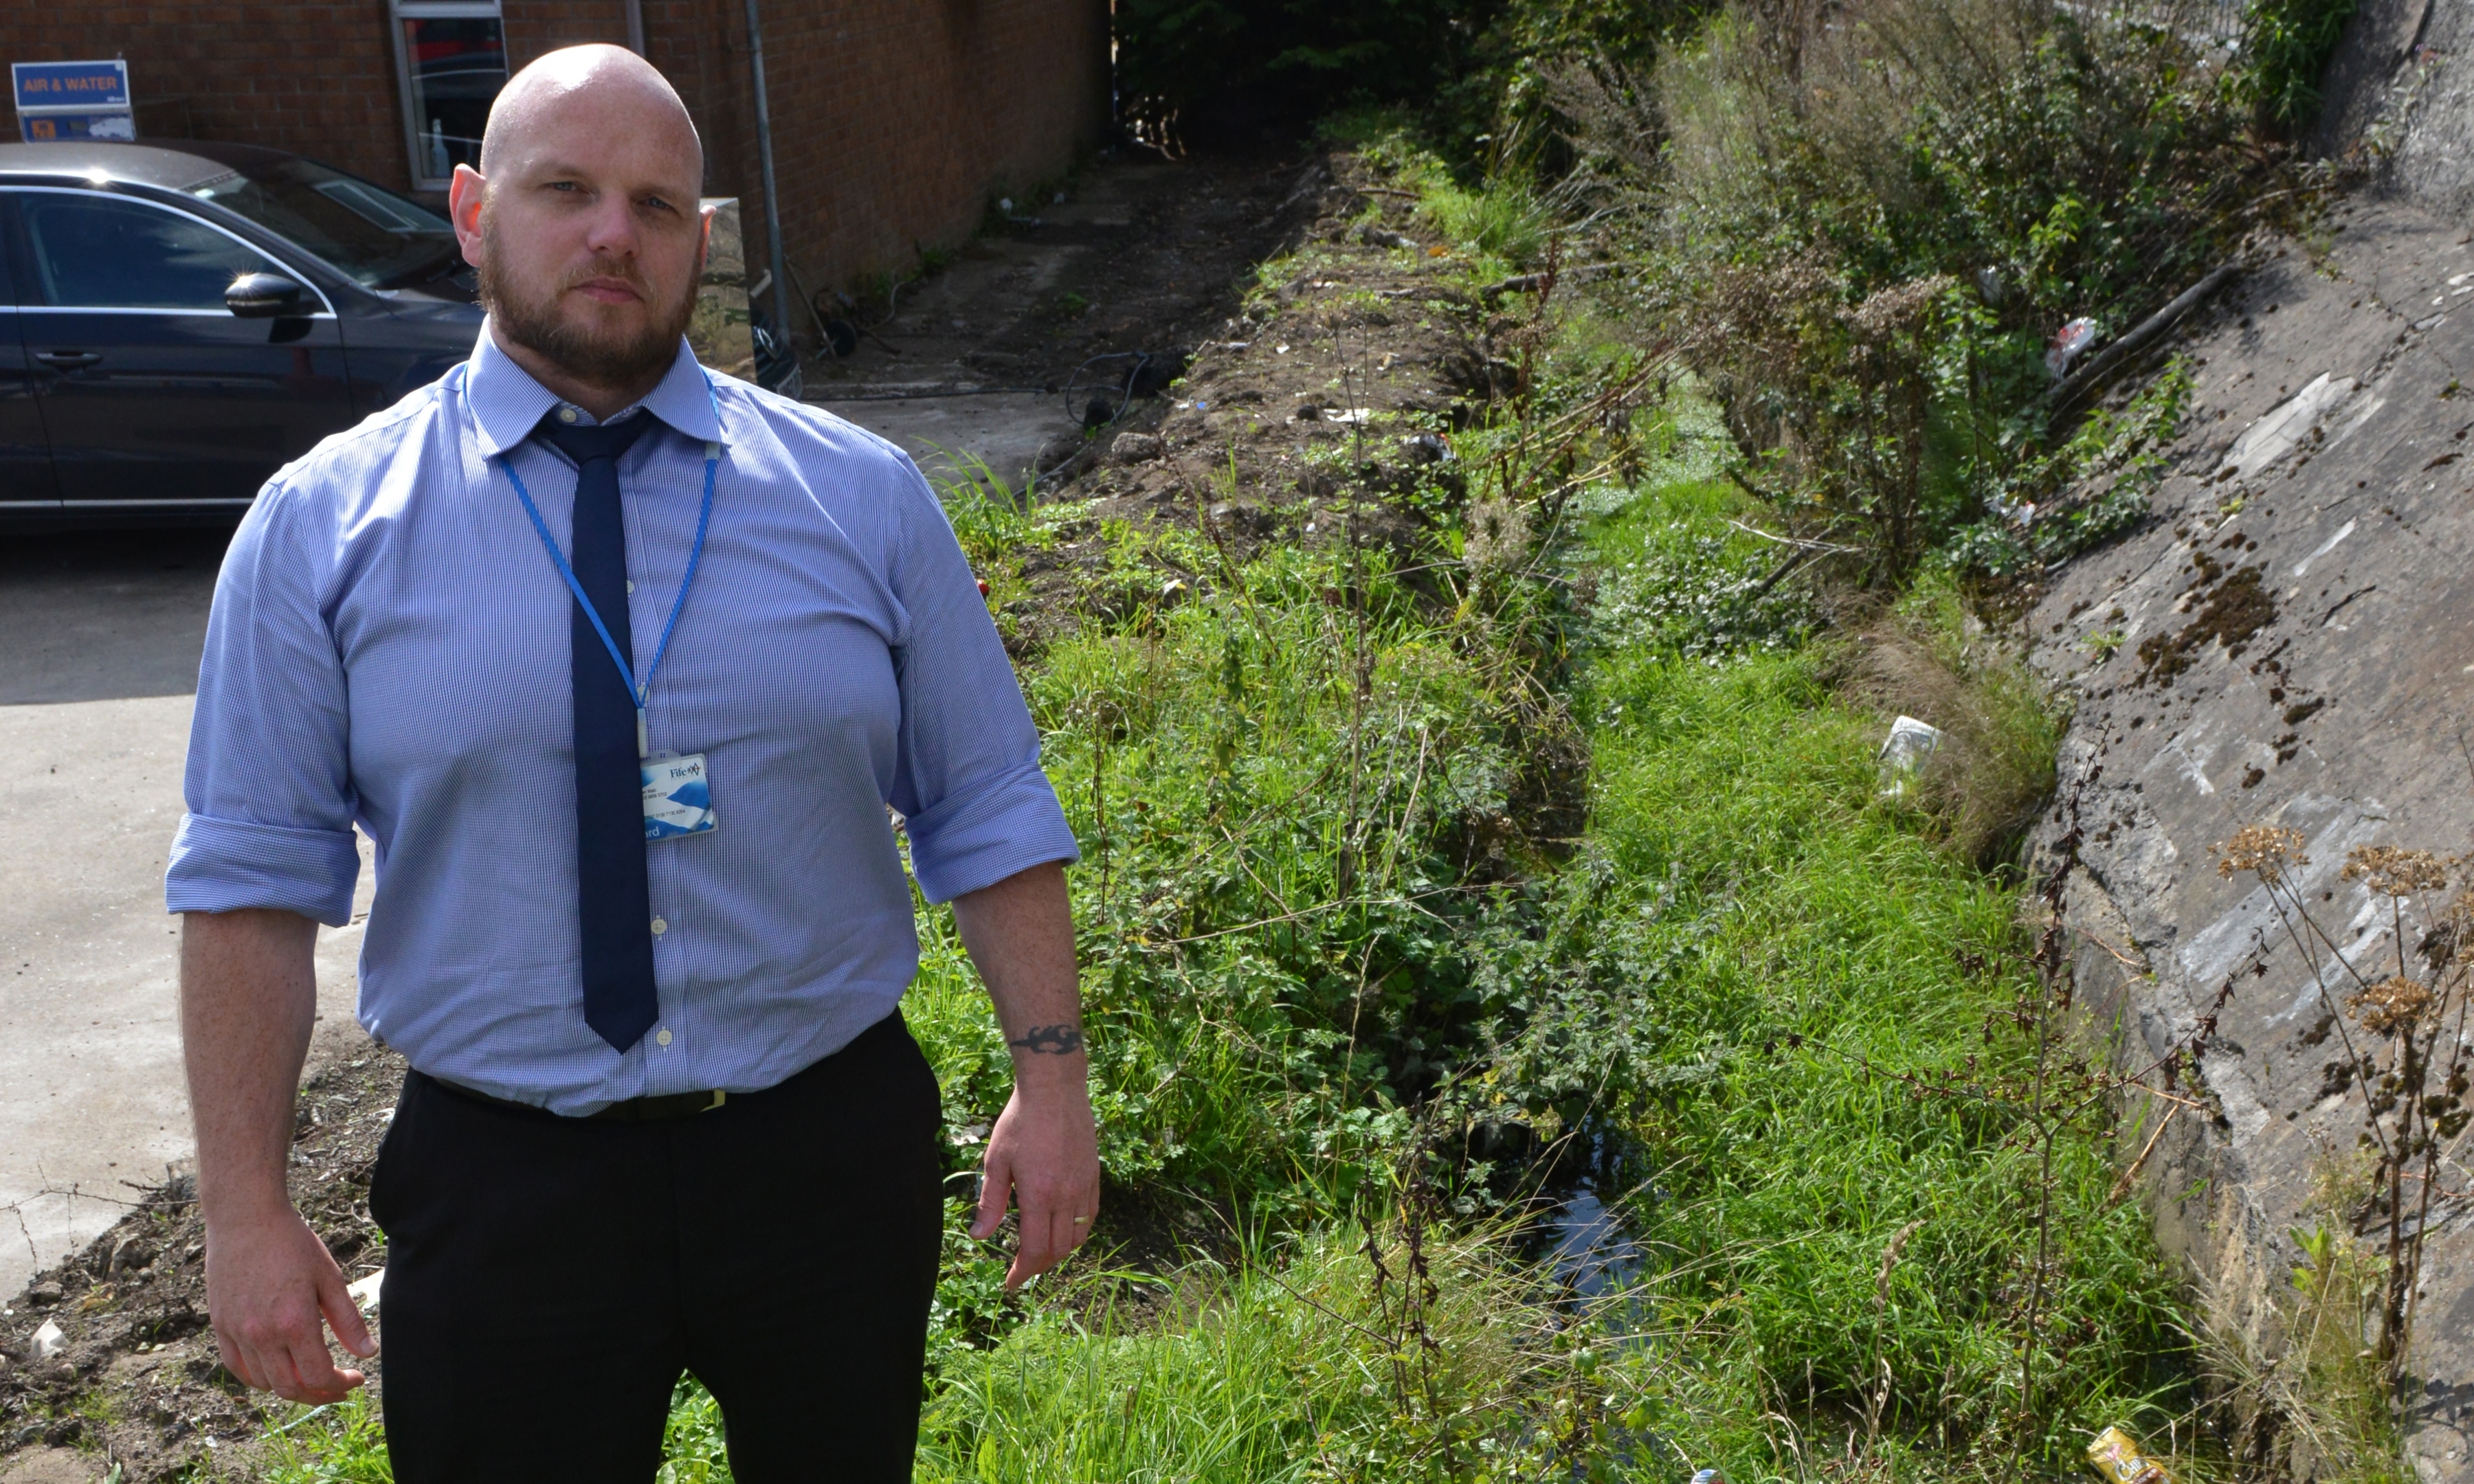 Councillor Darren Watt advised residents to dispose of rubbish responsibly.